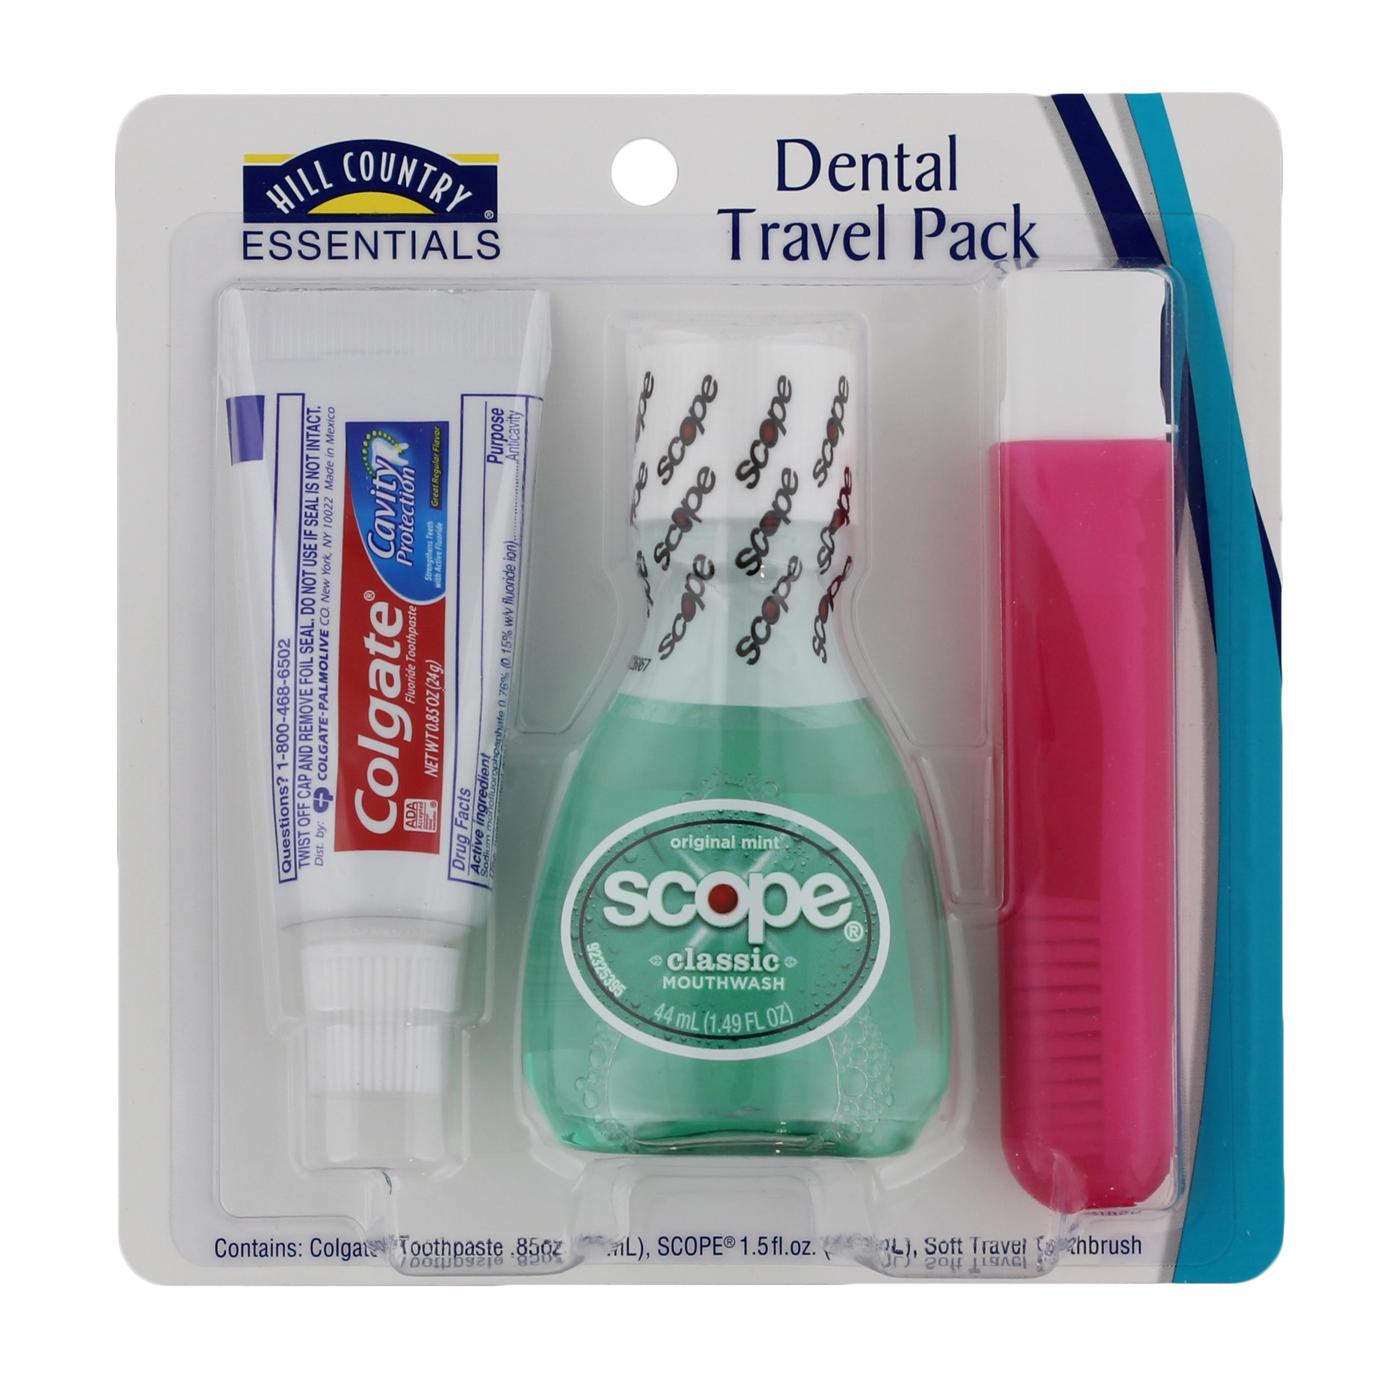 Hill Country Essentials Travel Size Dental Pack - Assorted; image 4 of 5